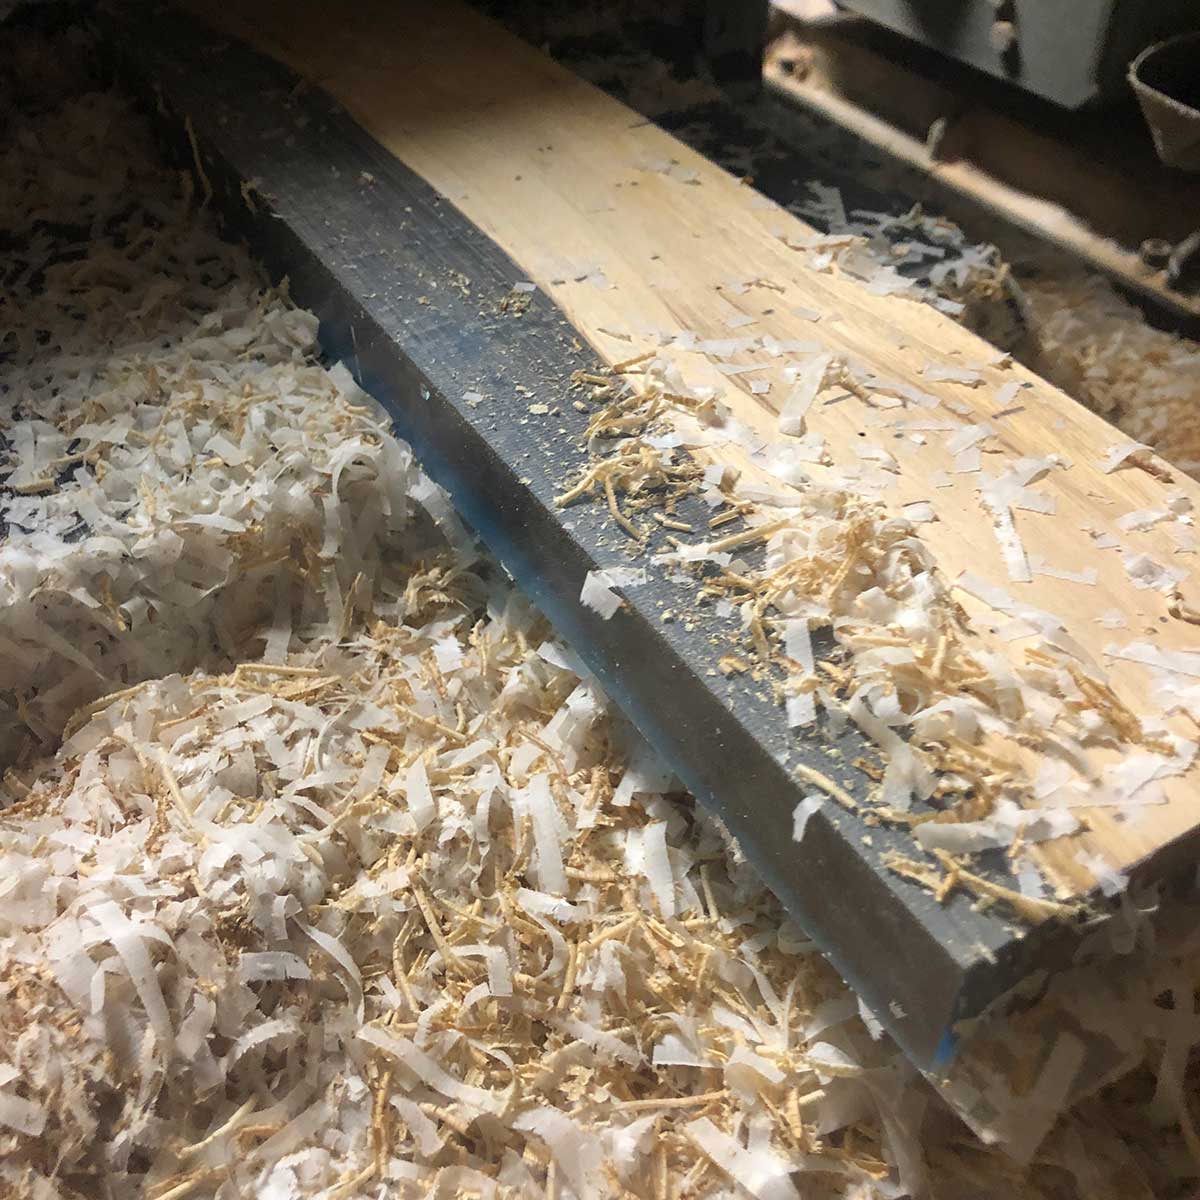 planer shavings and wood chips resting on a workbench after planing a live edge epoxy resin magnetic knife holder